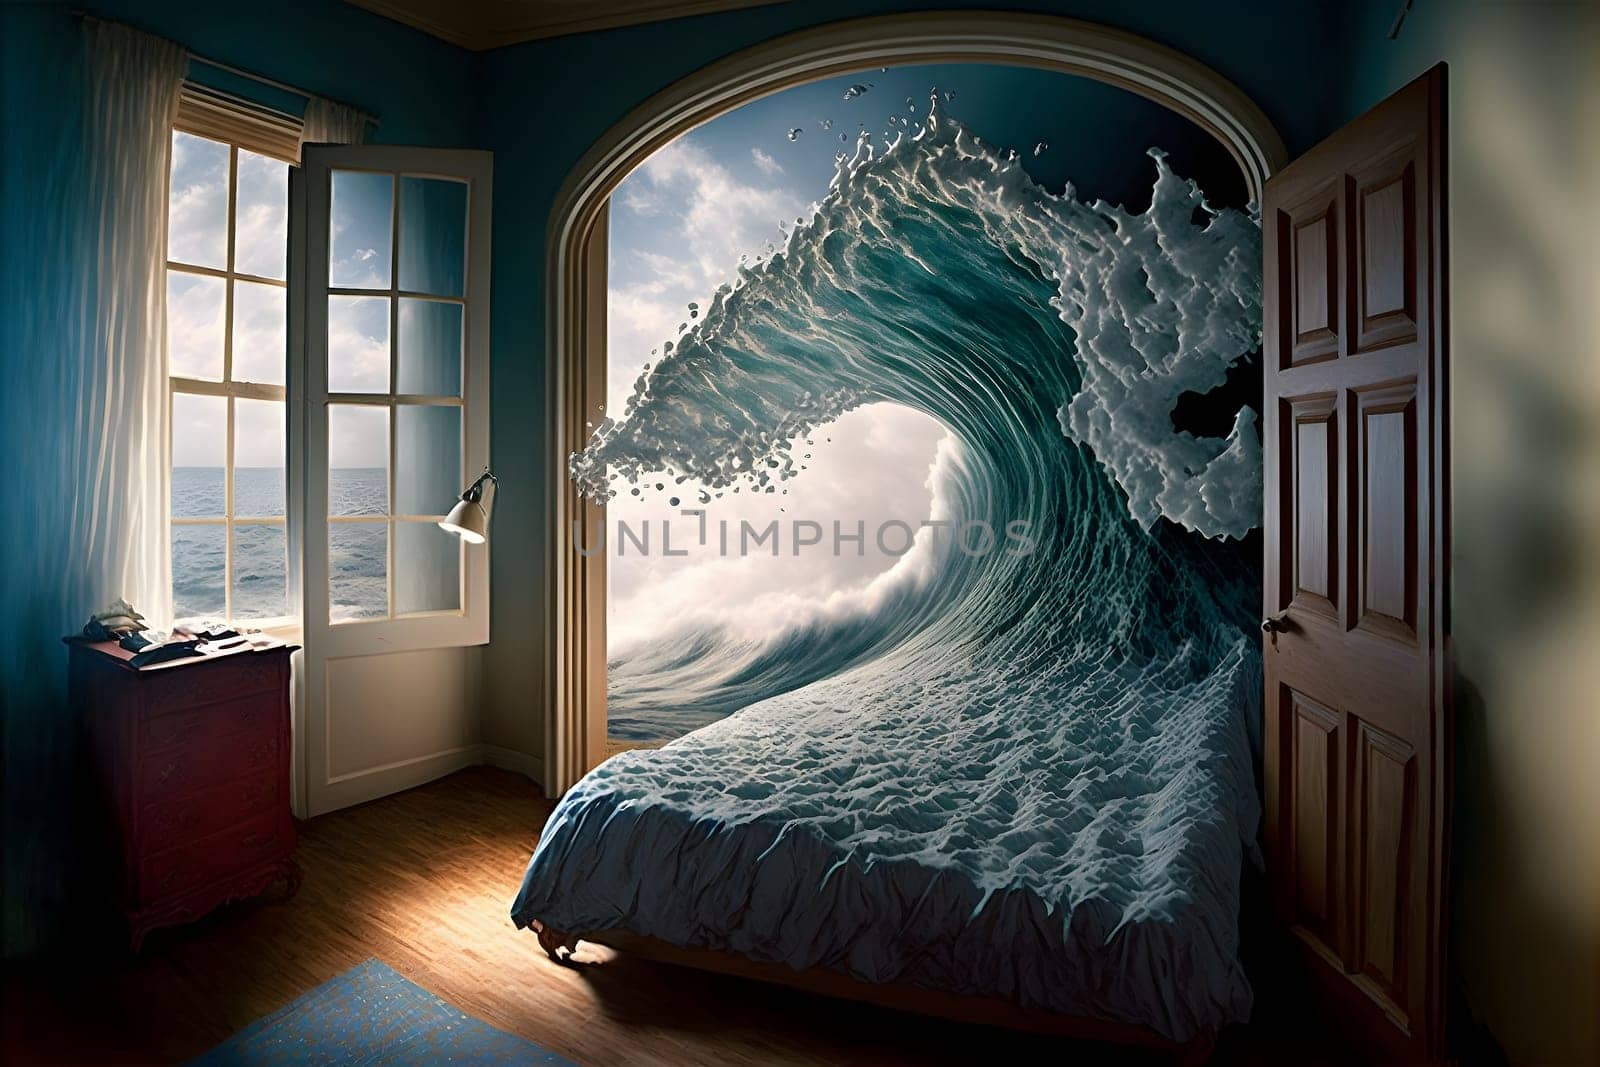 generic empty bedroom with white double bed with ocean wave is about to cover it, neural network generated art by z1b